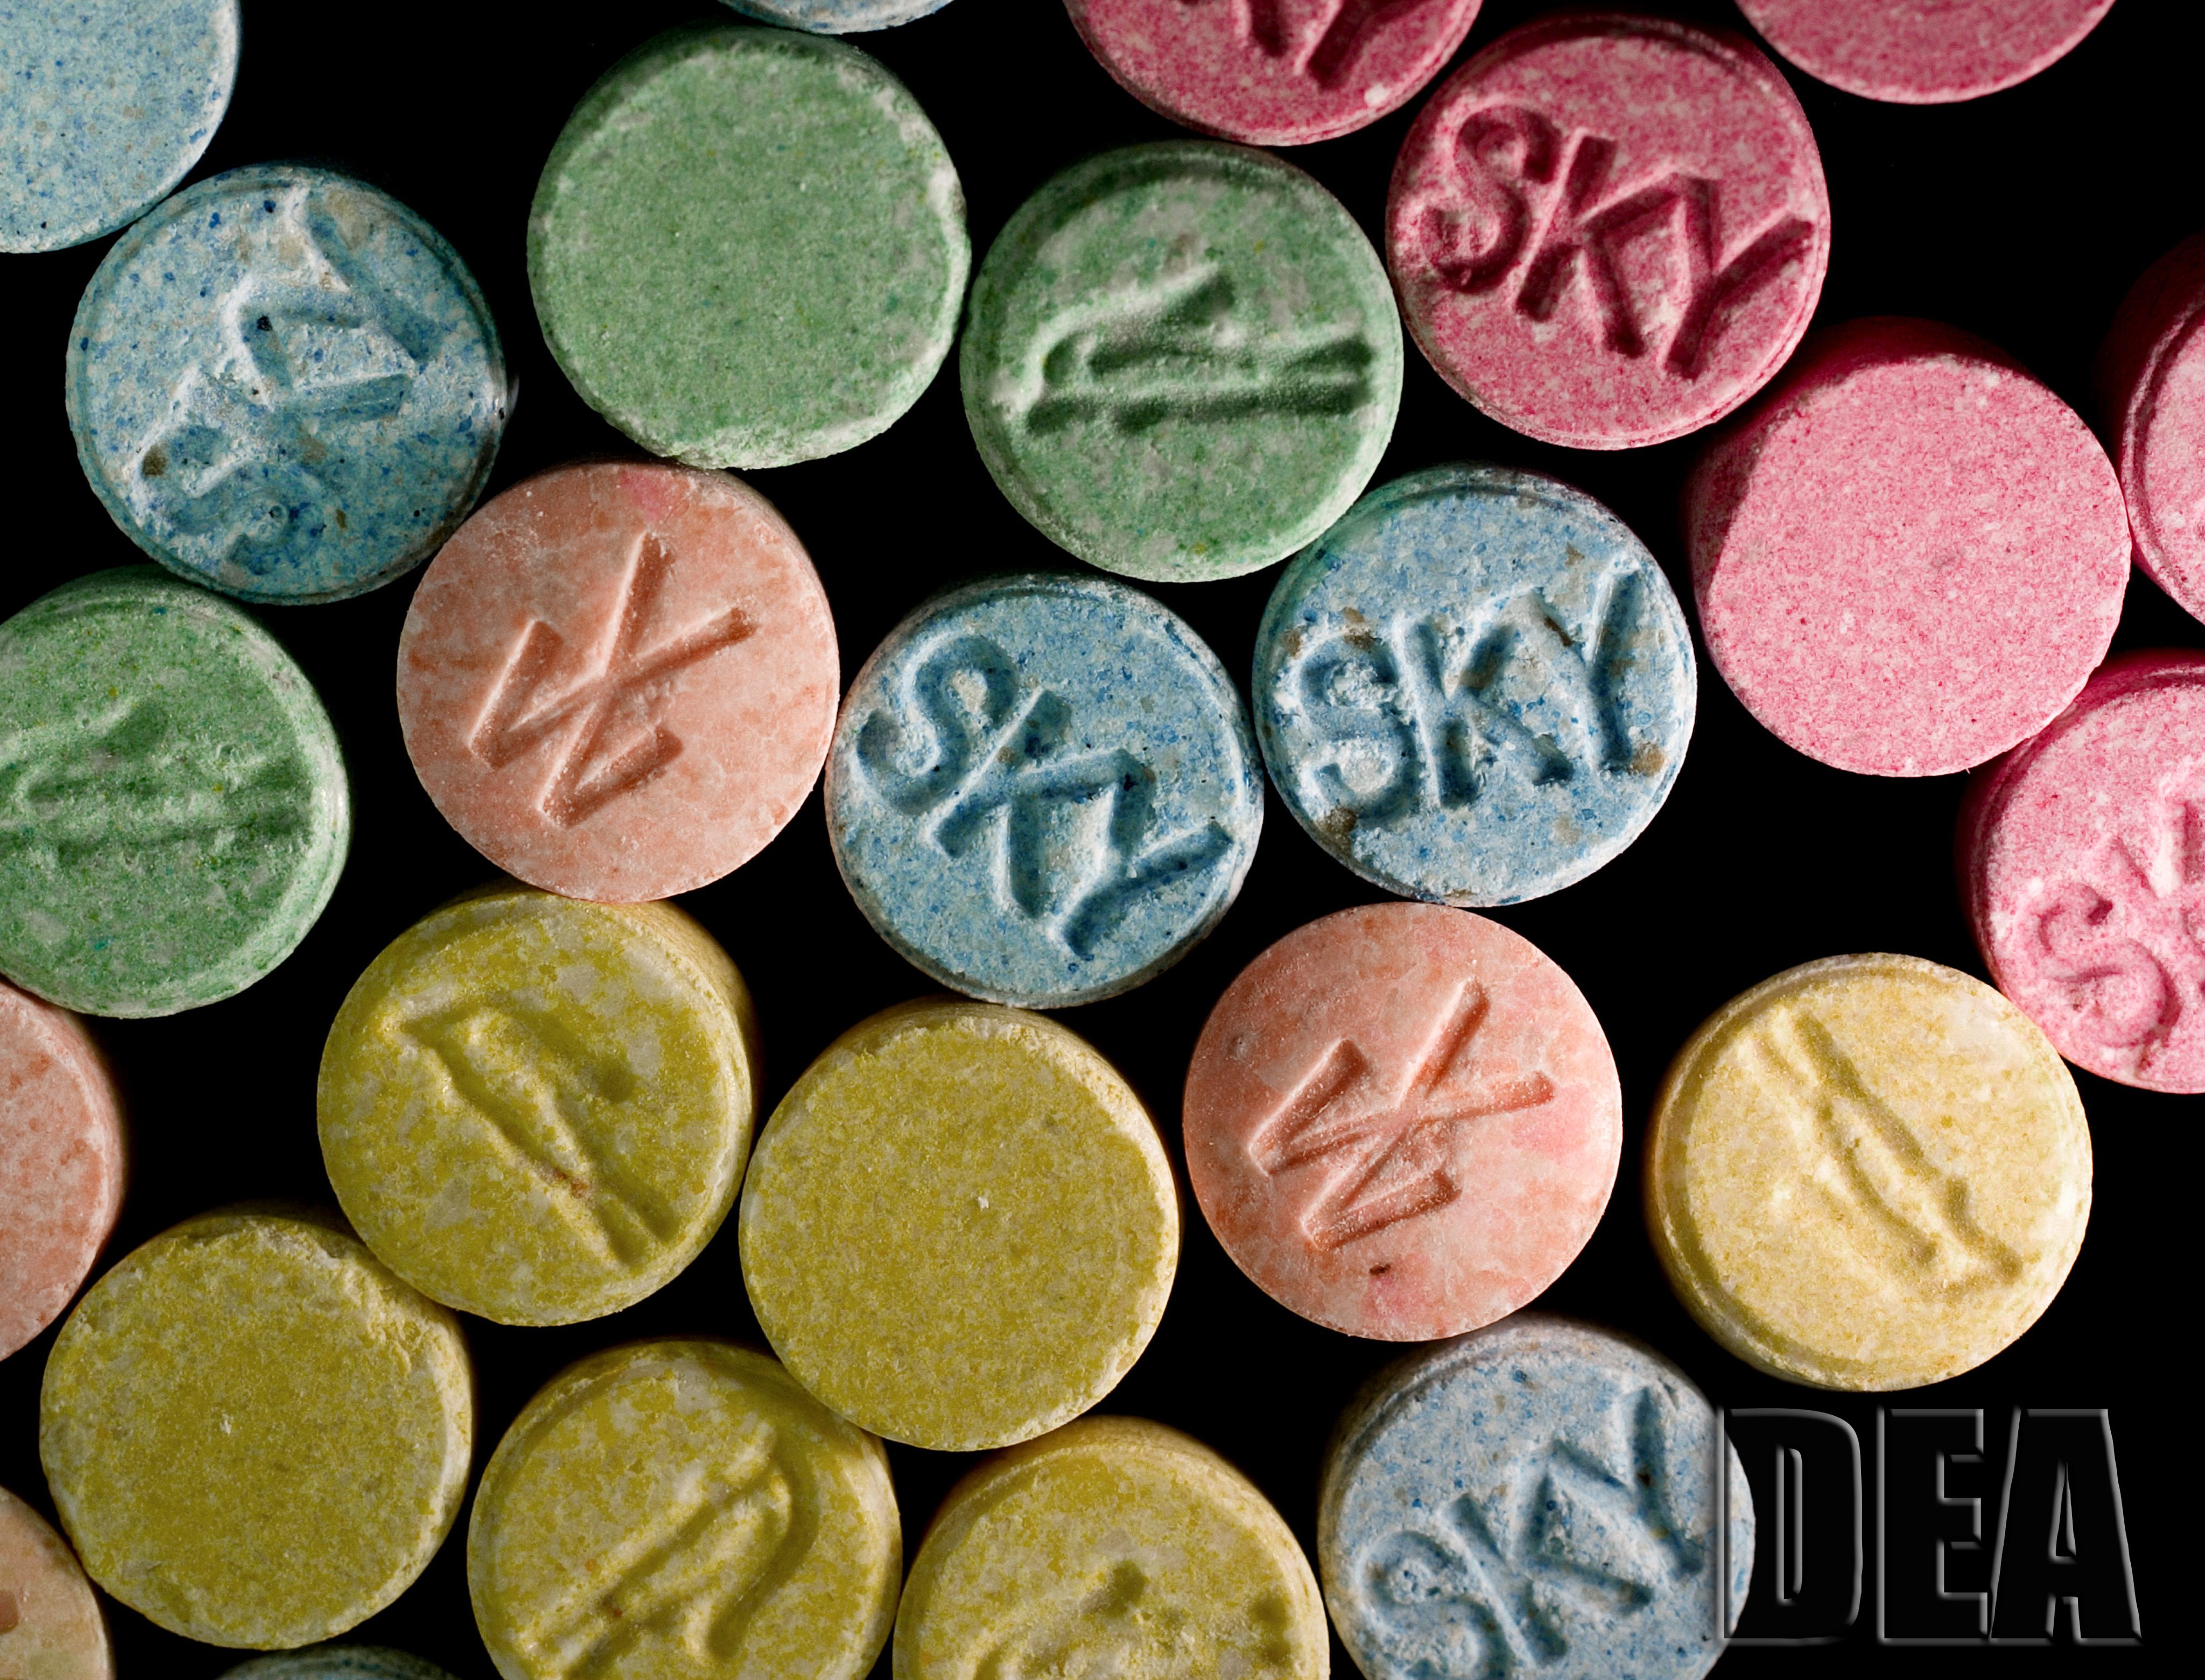 Ecstasy Vs Molly: What's The Difference? - Northern Illinois